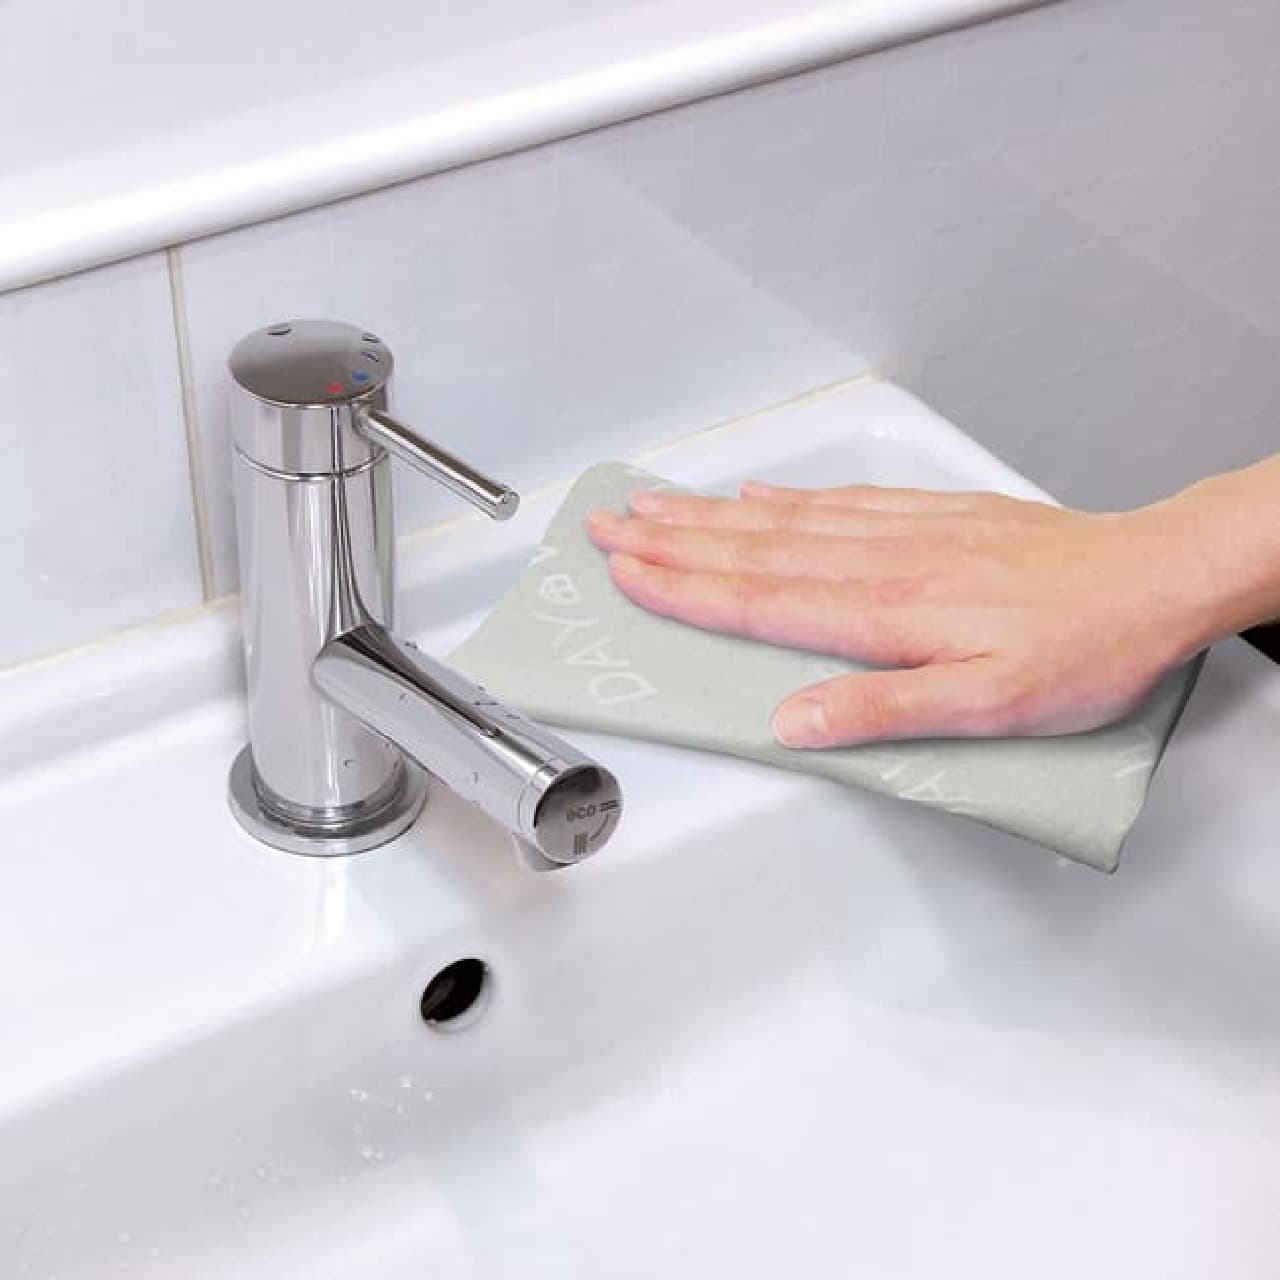 Nitori "Super Absorption Kitchen Cloth" released --Popular series new product! For cleaning around water and cleaning